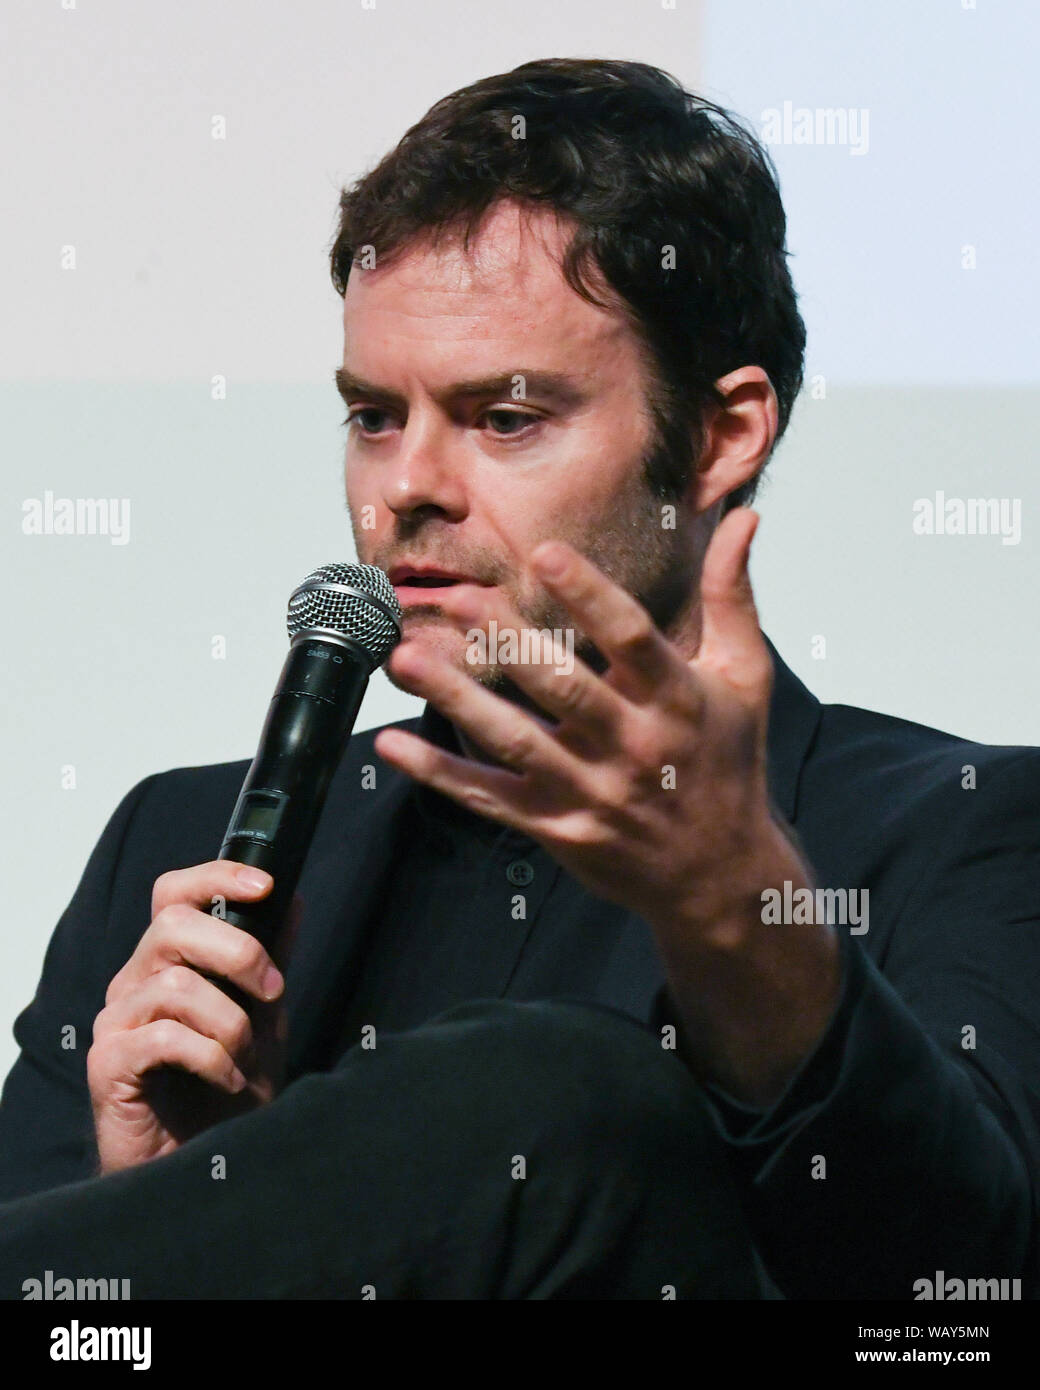 August 21, 2019, Bevery Hills, California, USA: Bill Hader speaks onstage during the Writers Guild Foundation's Sublime Primetime 2019 at the Writers Guild Theater - Beverly Hills, California. (Credit Image: © Billy Bennight/ZUMA Wire) Stock Photo